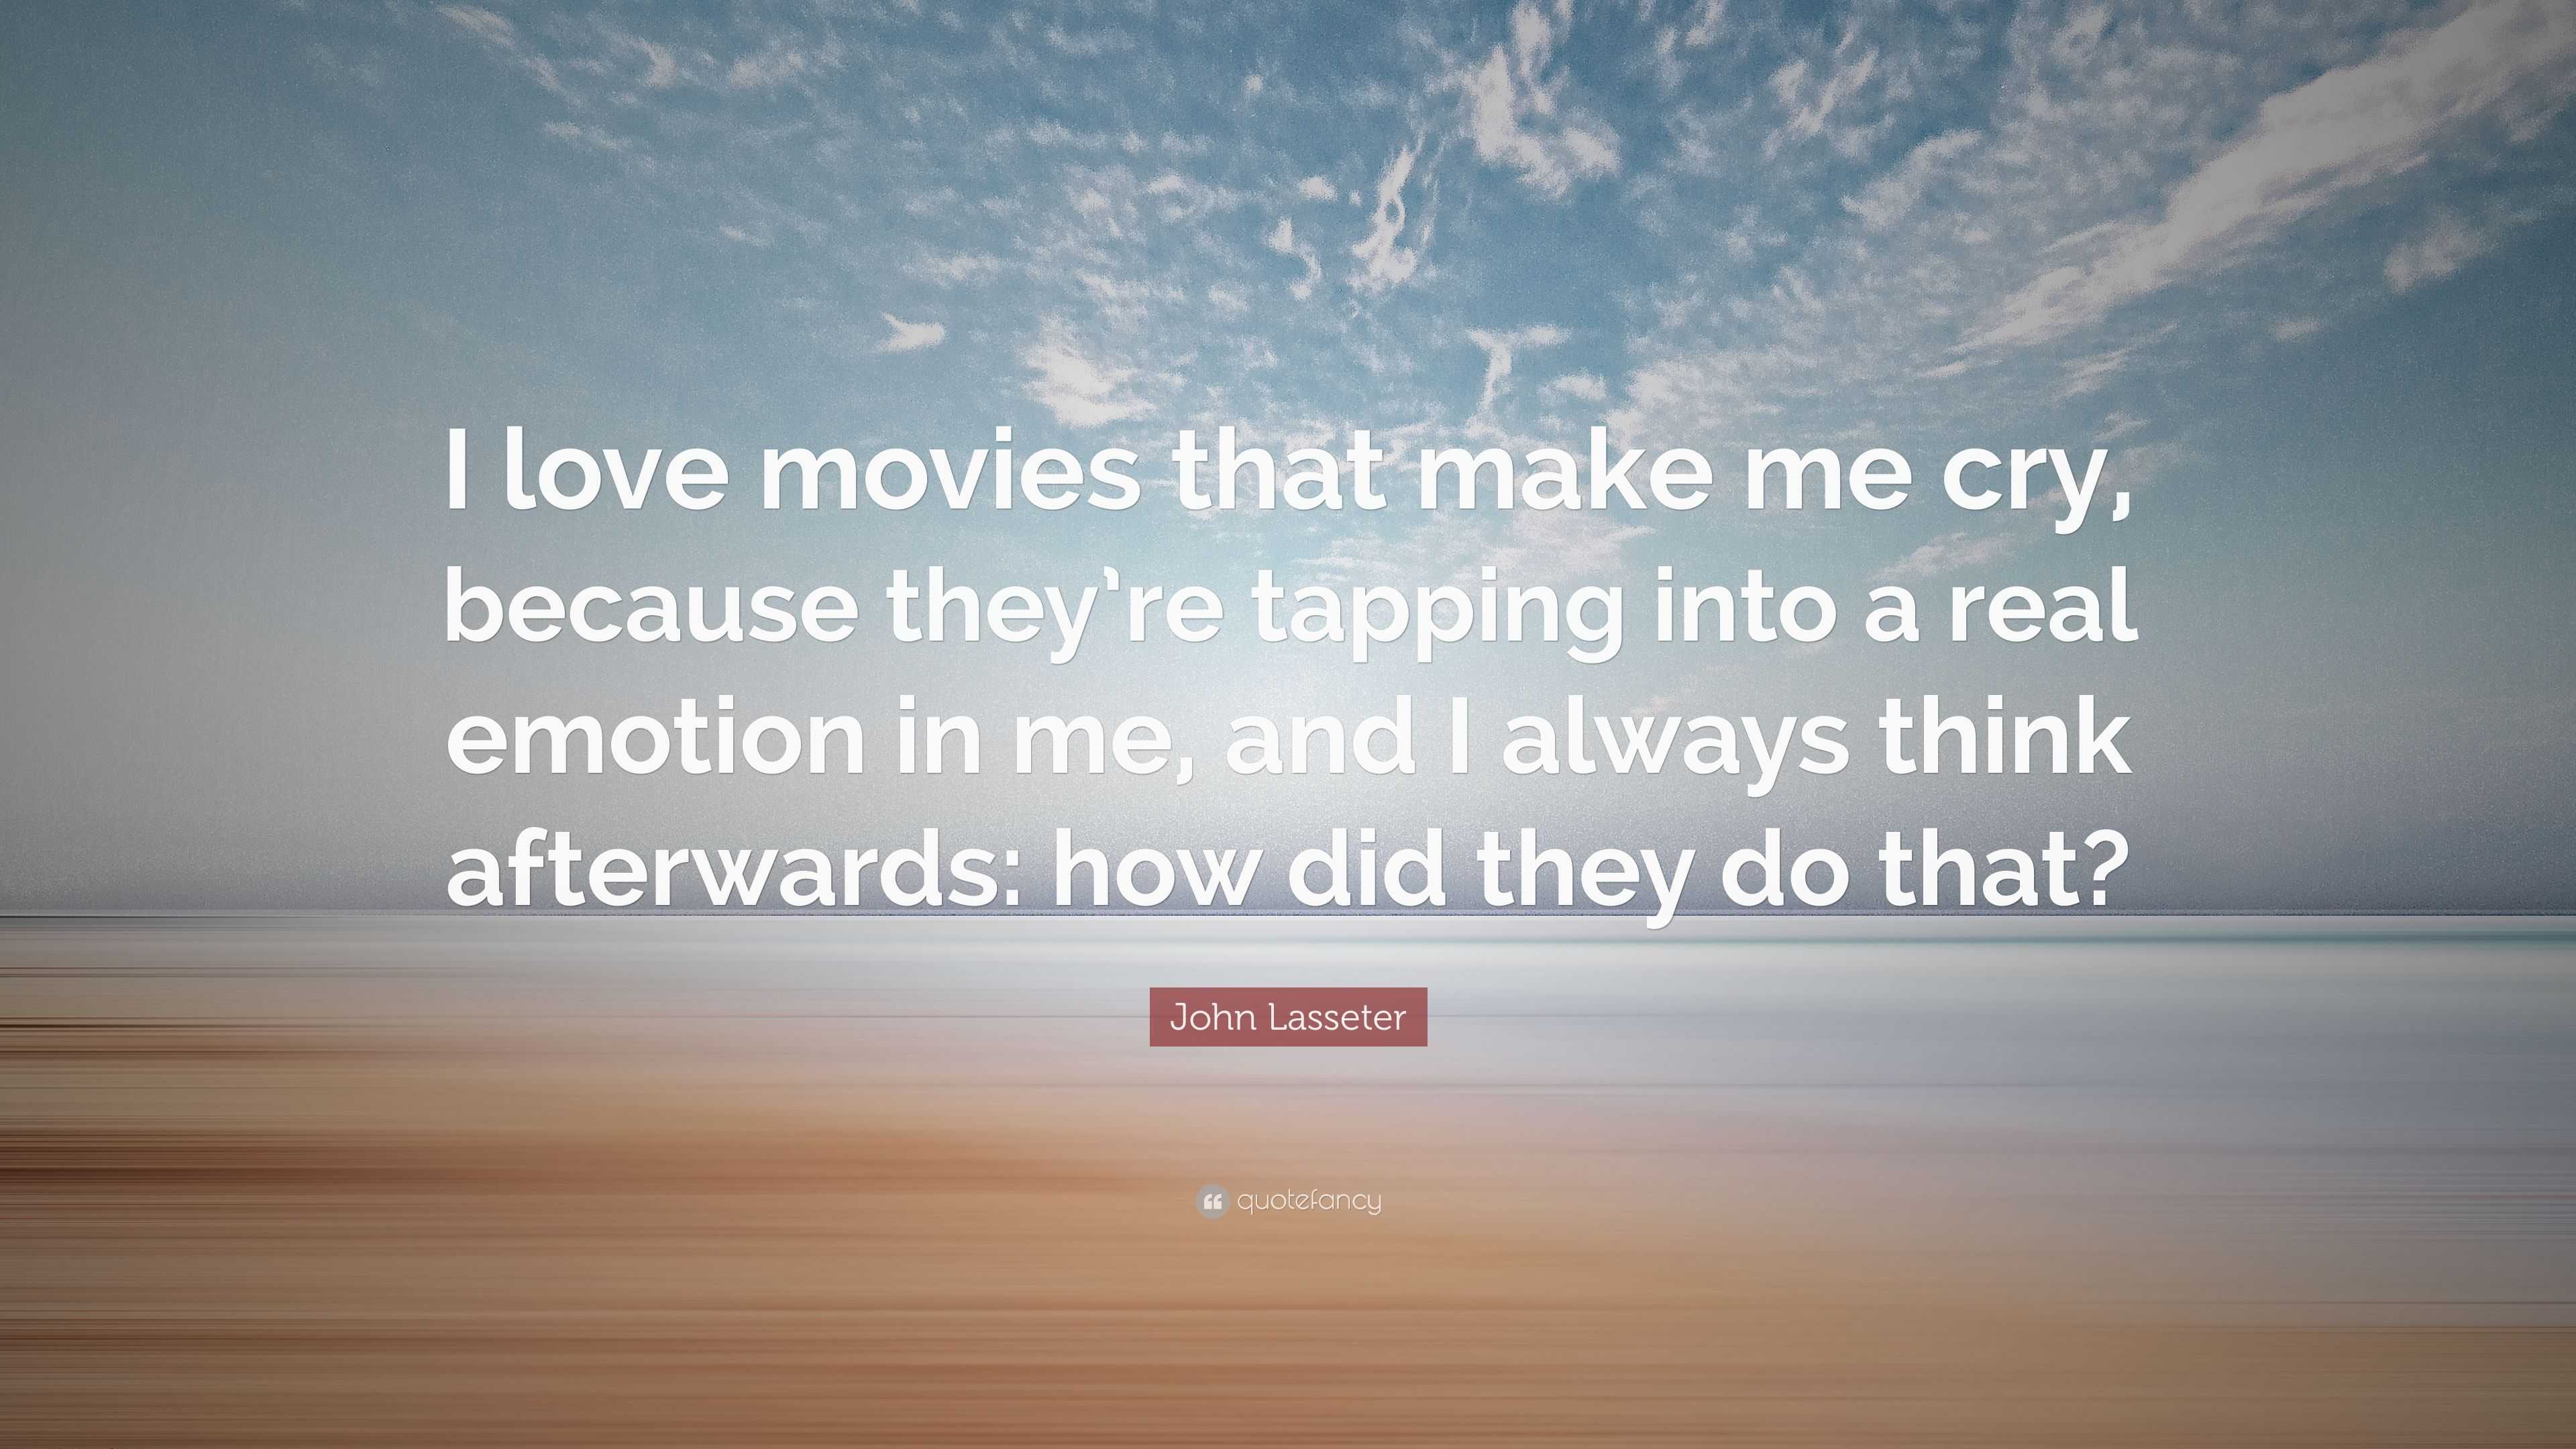 John Lasseter Quote “I love movies that make me cry because they